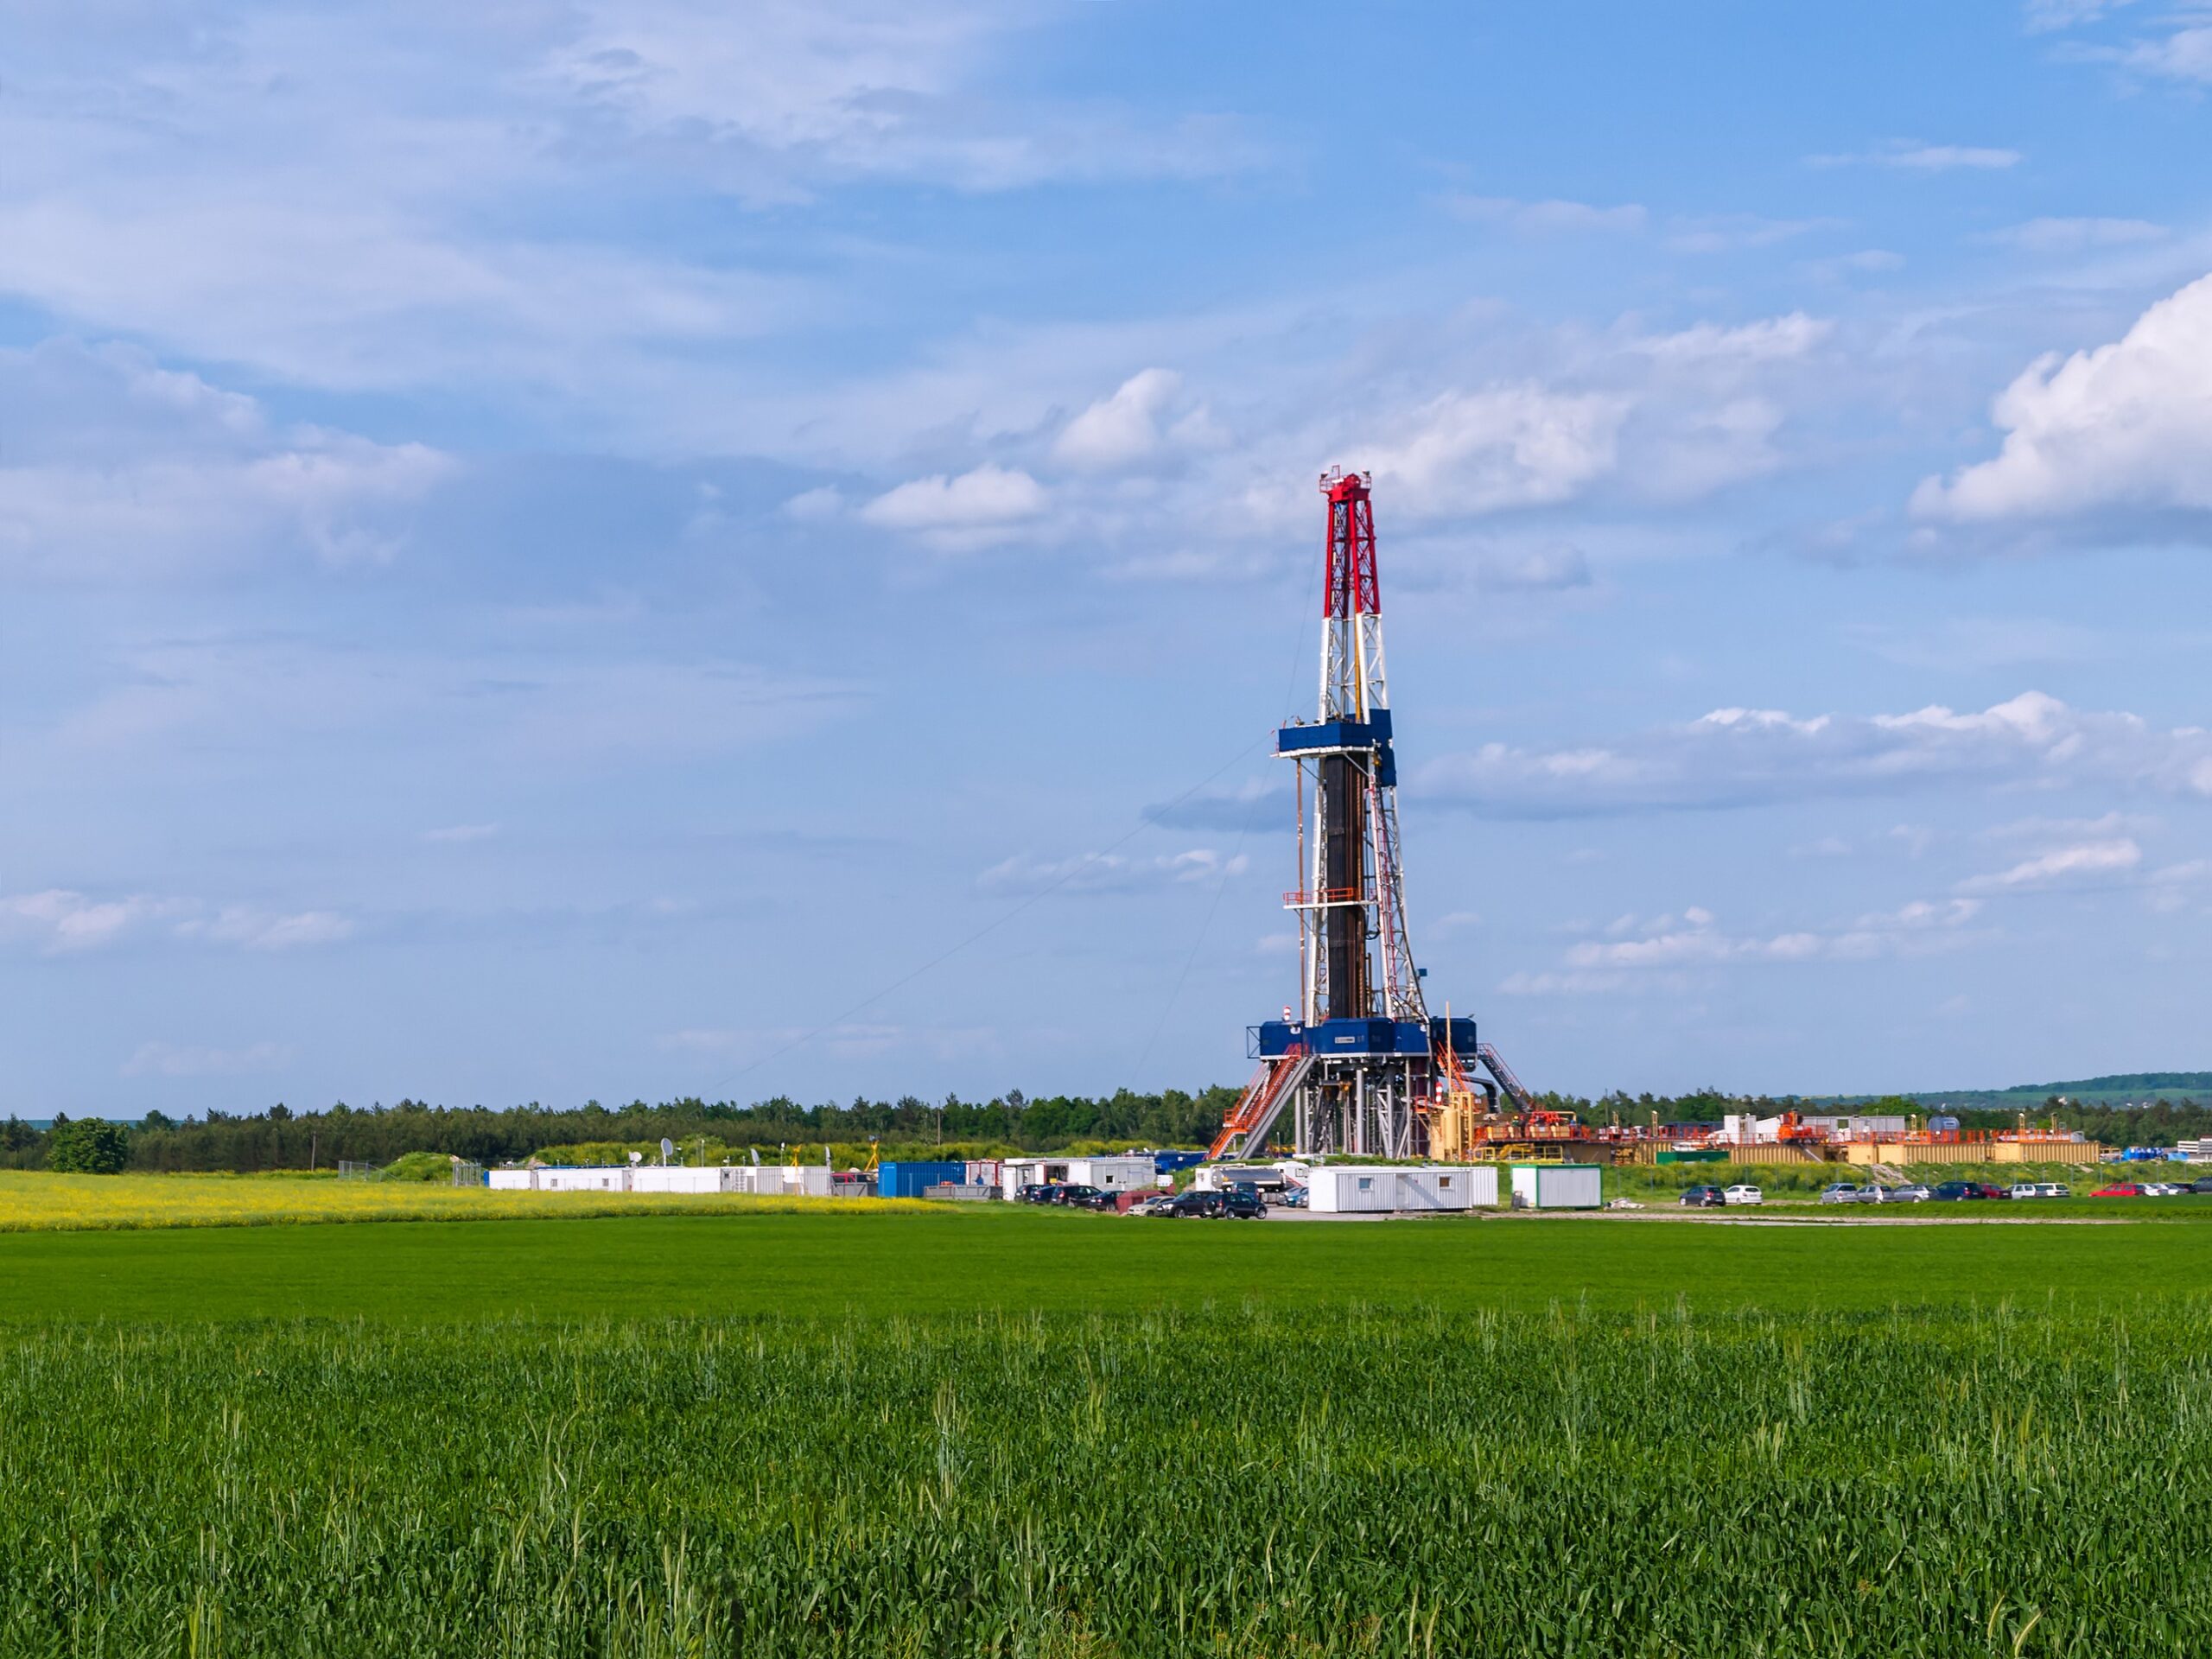 Selling Mineral Rights in Texas in 2022? How to get the best price.